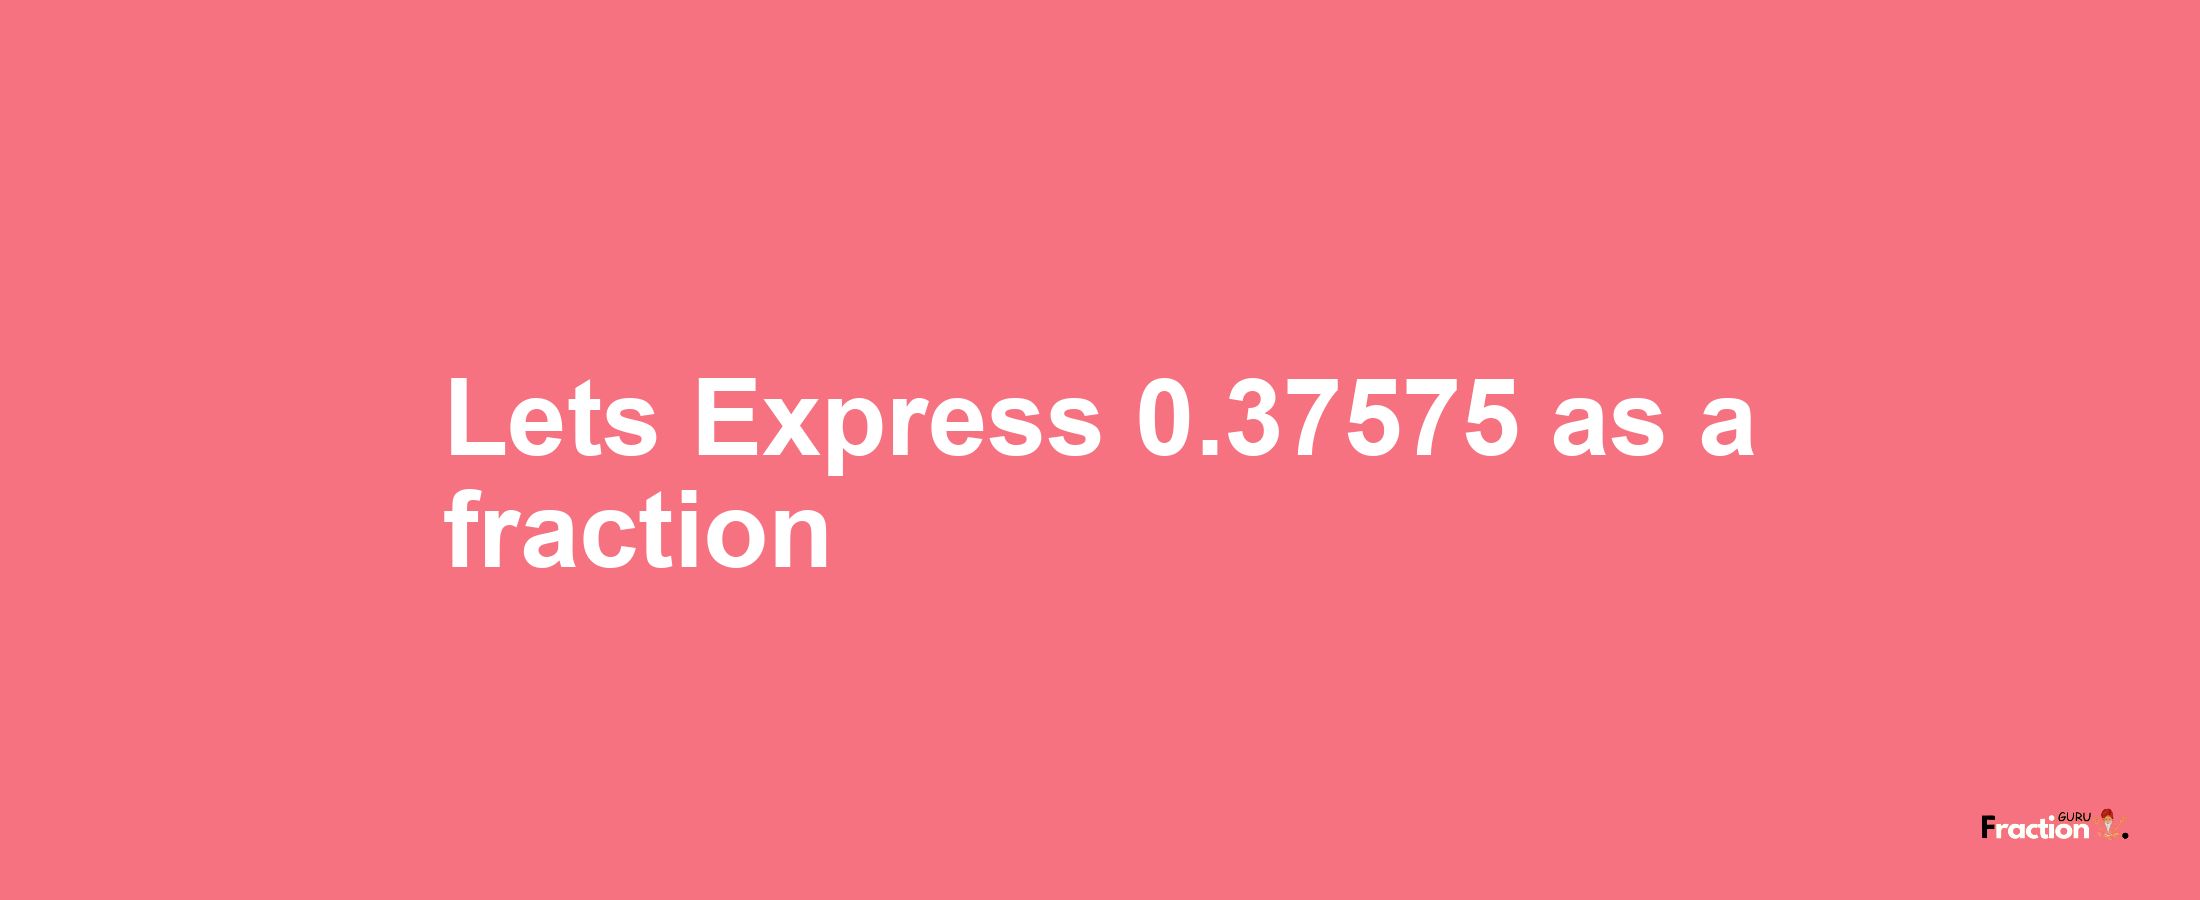 Lets Express 0.37575 as afraction